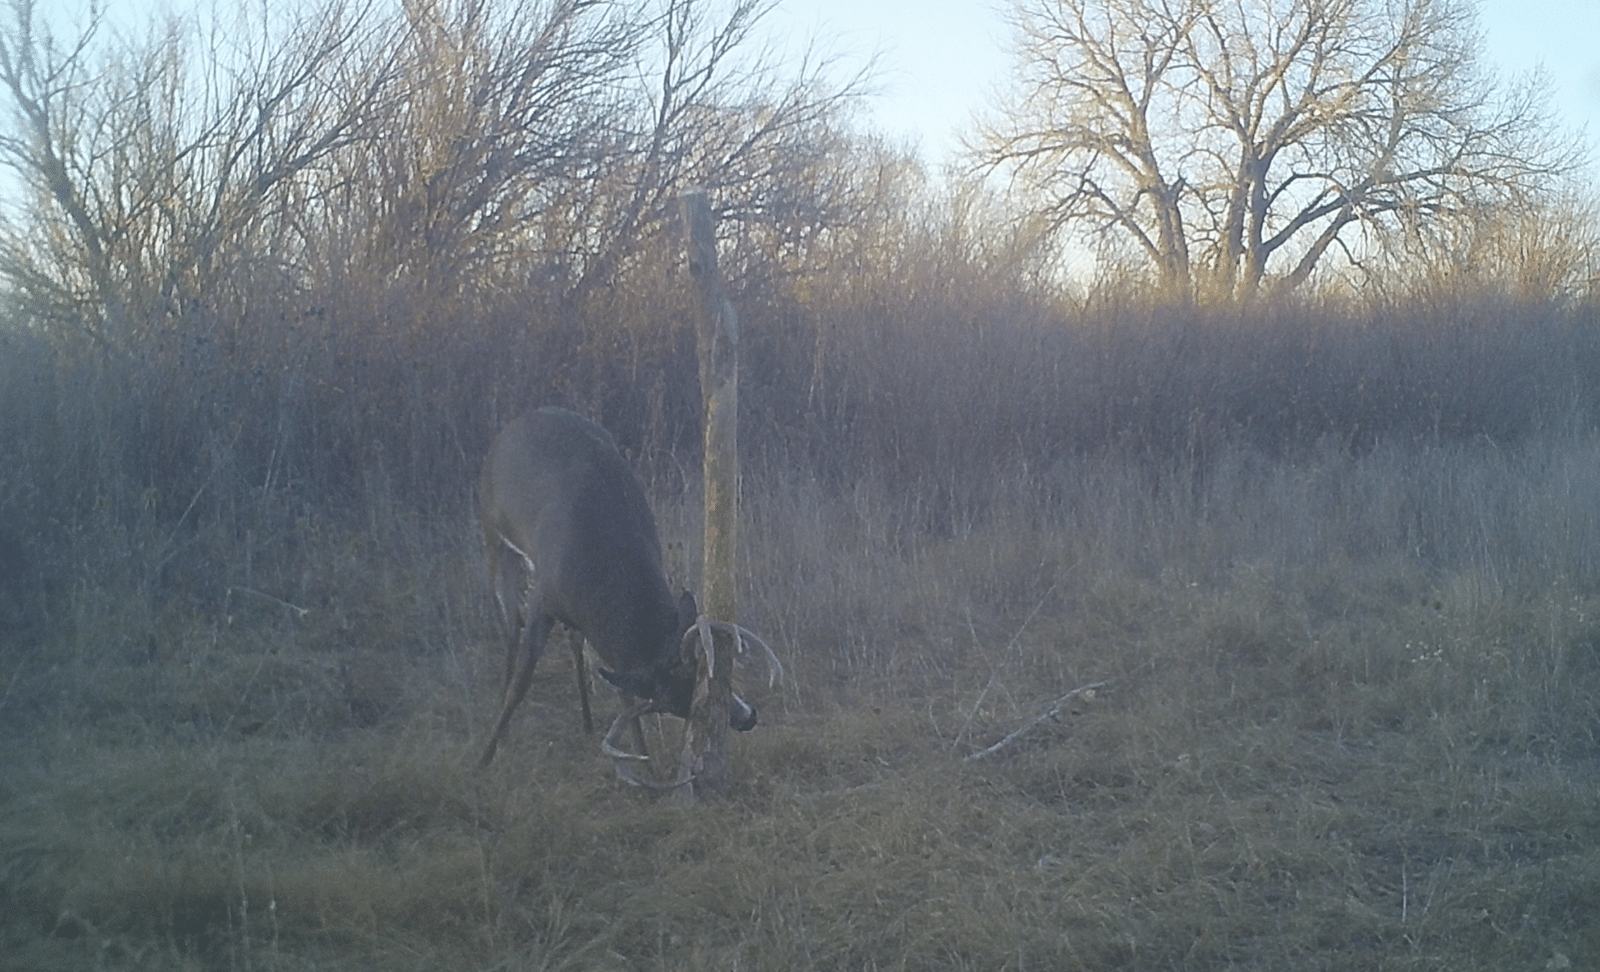 Bucks love a good rubbing post. It can be part of the ultimate whitetail property.